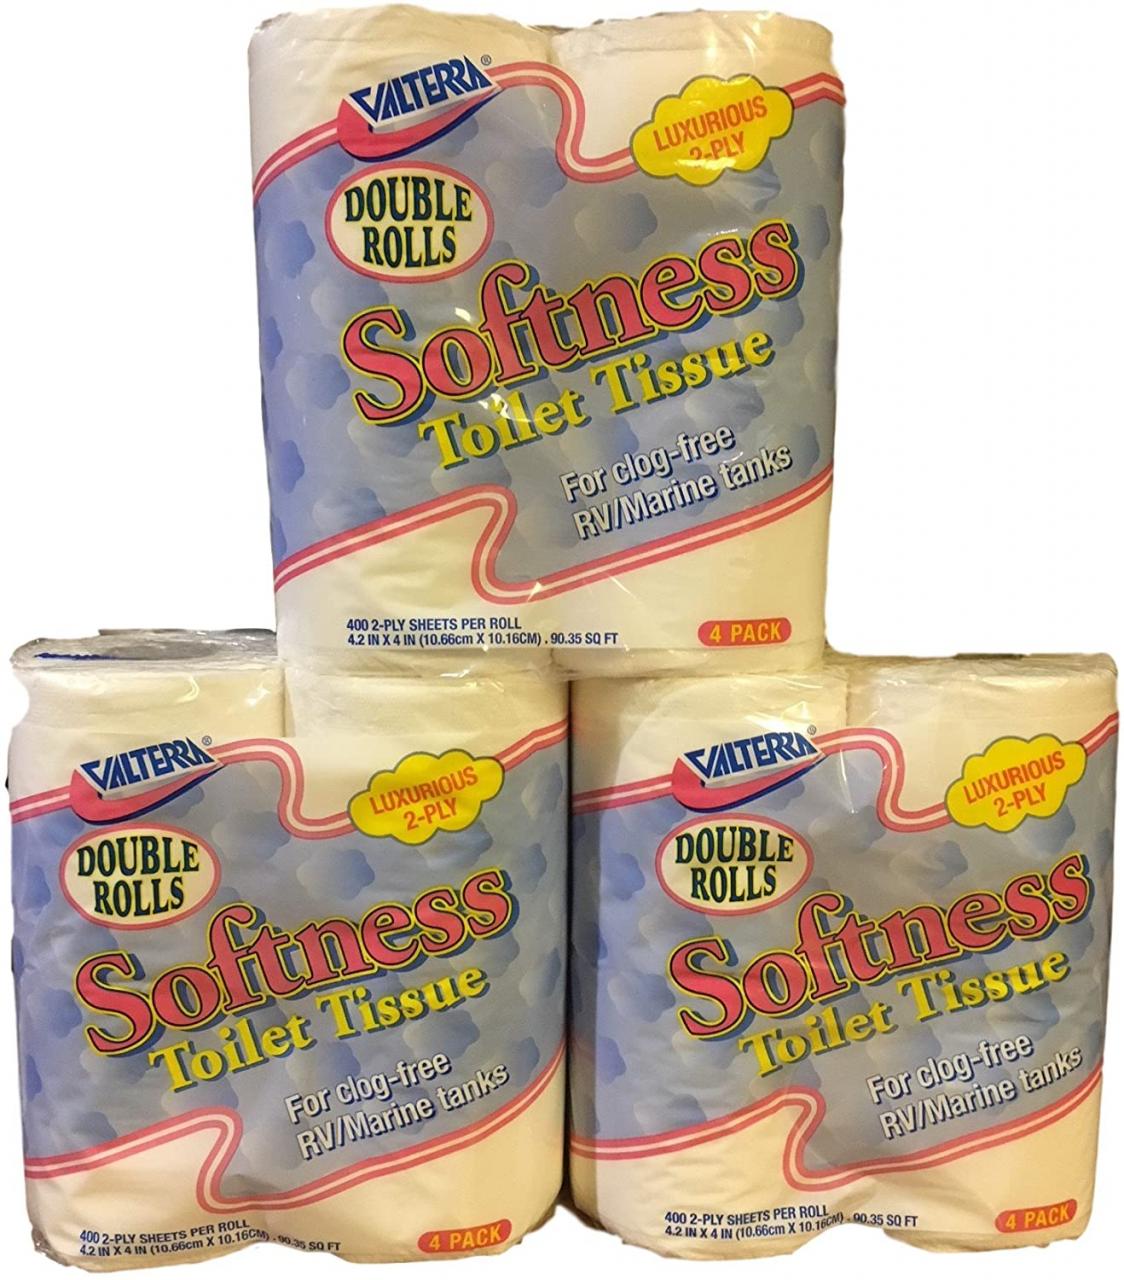 Valterra Q23638 Softness 2-Ply Toilet Tissue Pack of 4 Double Roll Paper  Products Toilet Tissue royabazaar.com